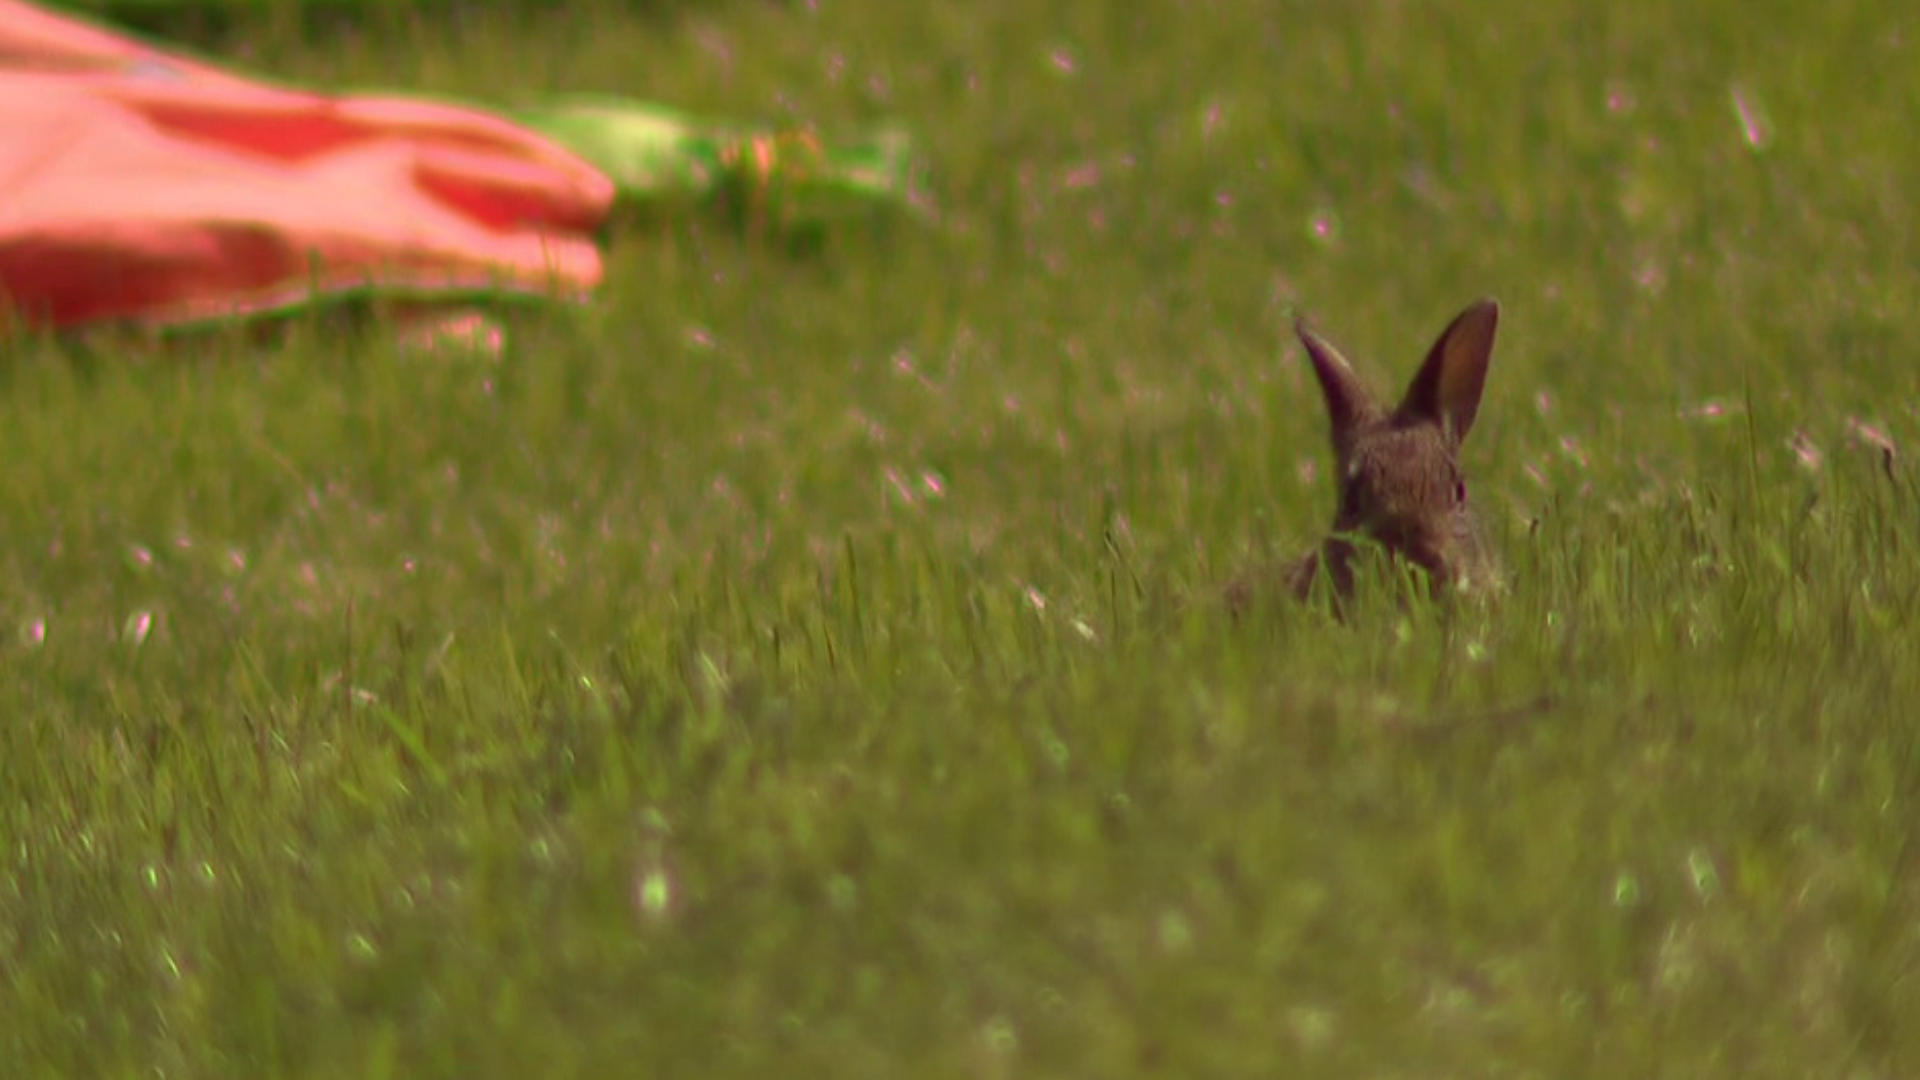 At this time of the year, it is not uncommon to find baby bunnies, called kits, or a bunny
nest in your backyard.